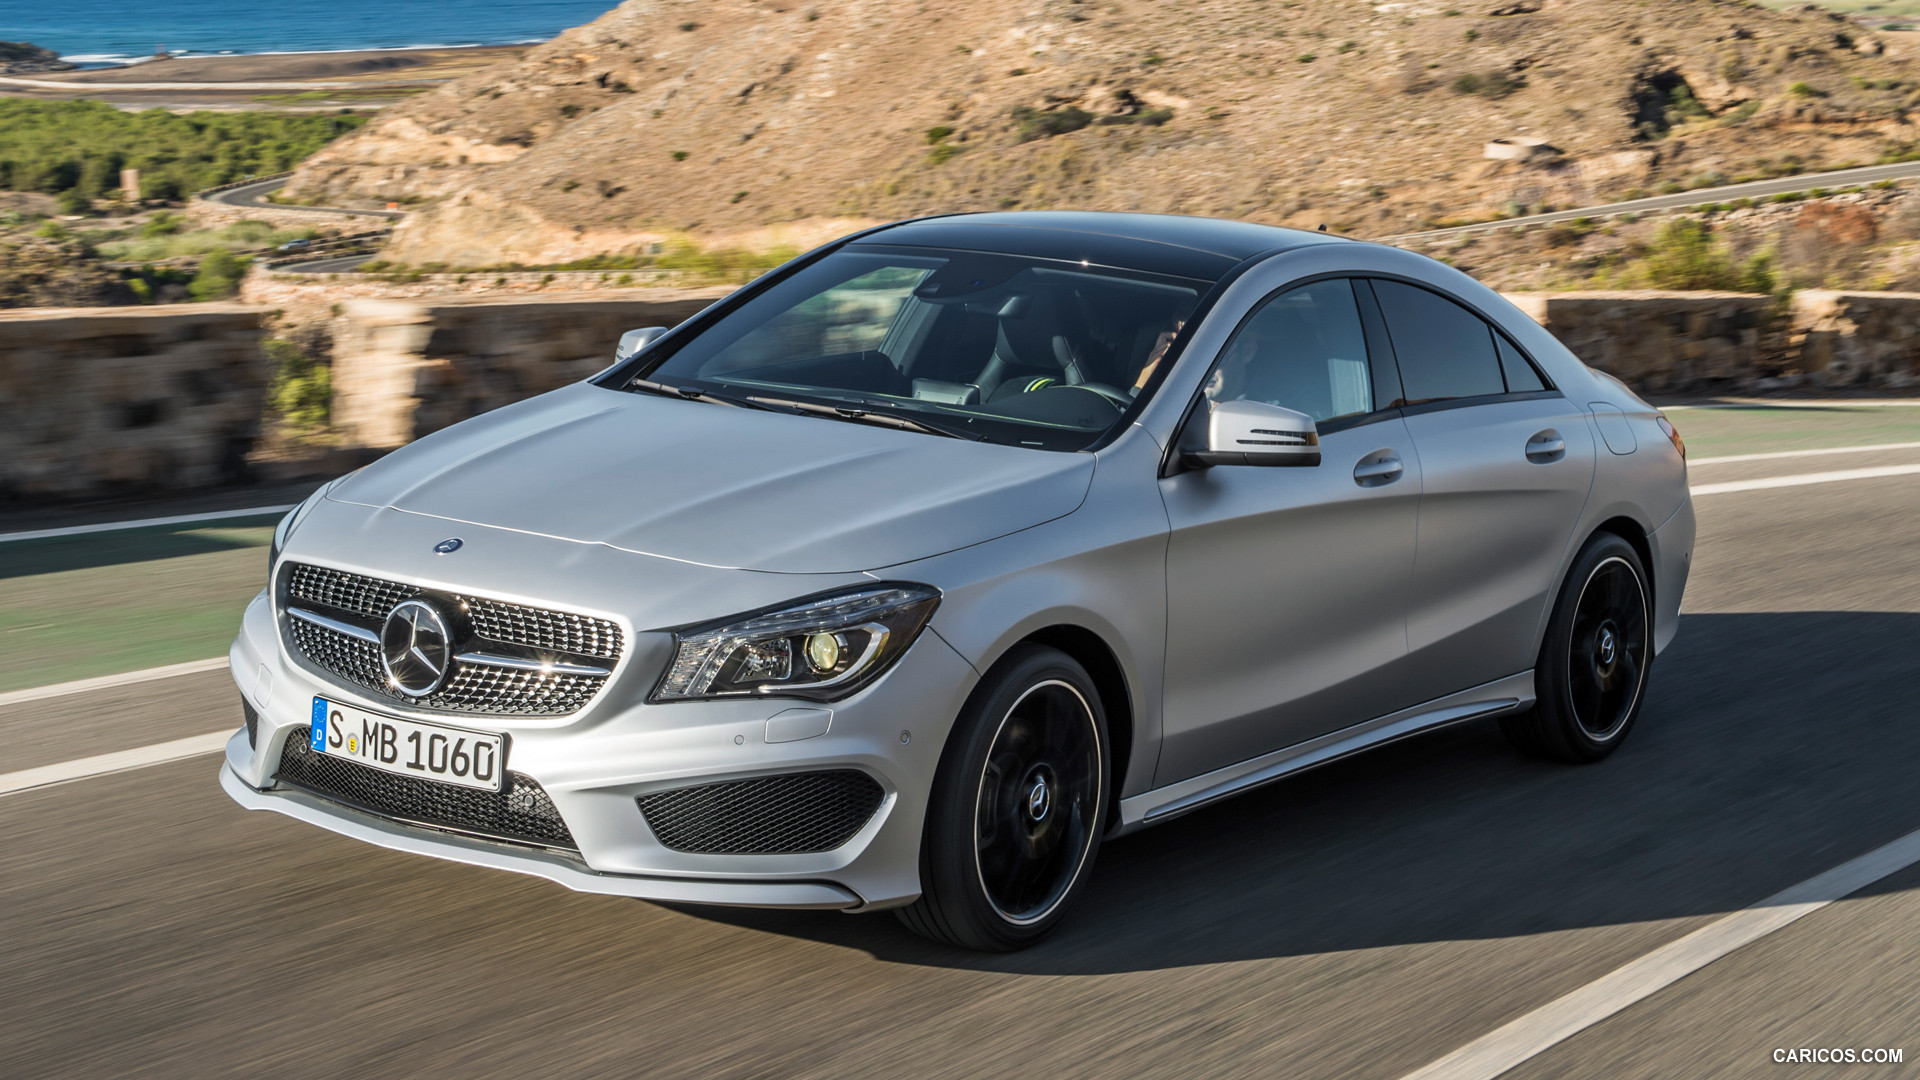 2014 Mercedes-Benz CLA-Class CLA 250 Edition 1 - Front, #4 of 183